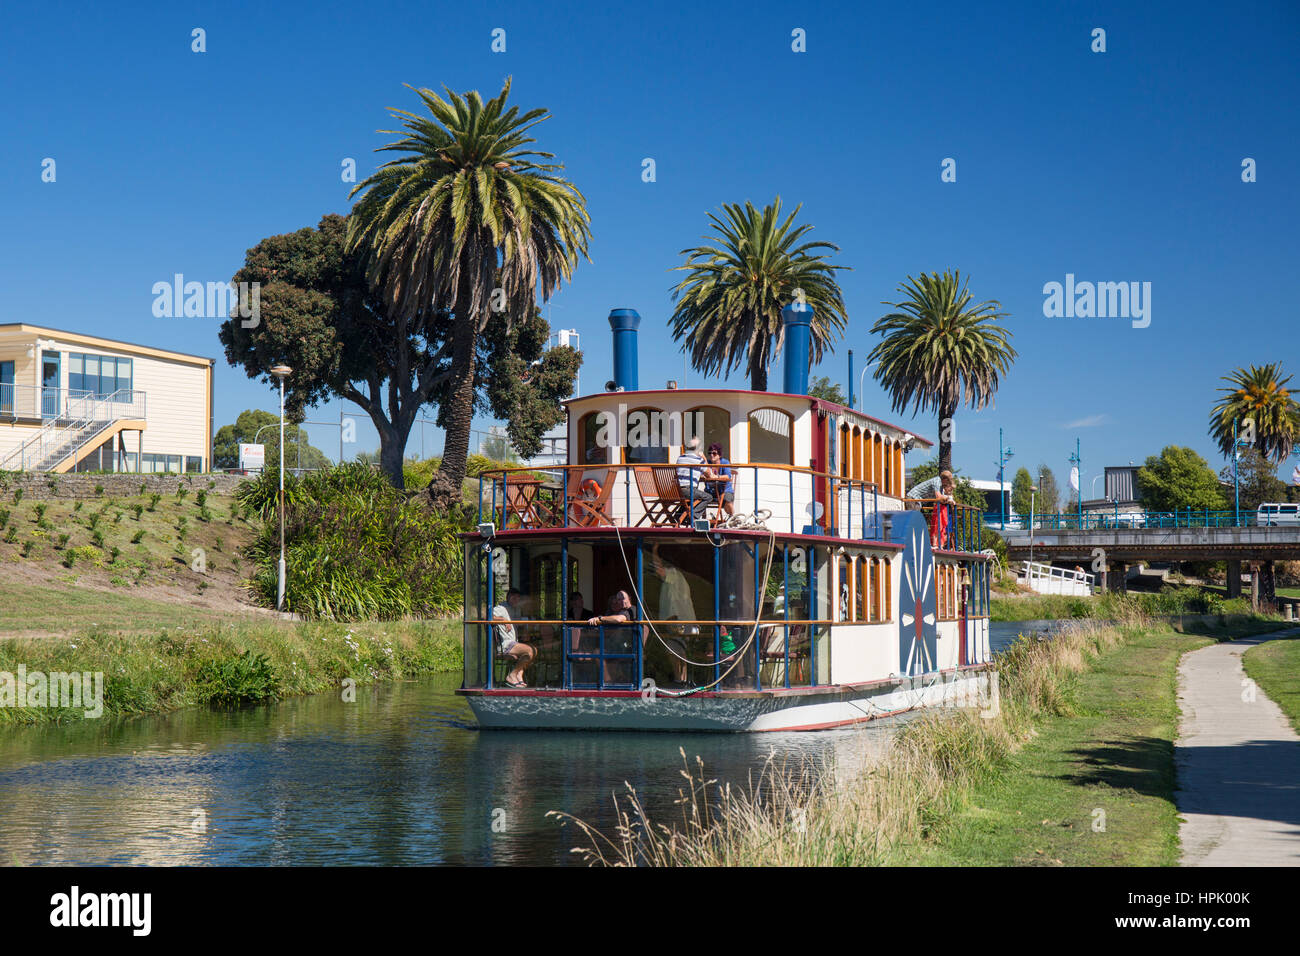 Blenheim, Marlborough, New Zealand. View along the palm-lined Taylor River, Marlborough's River Queen heading downstream. Stock Photo